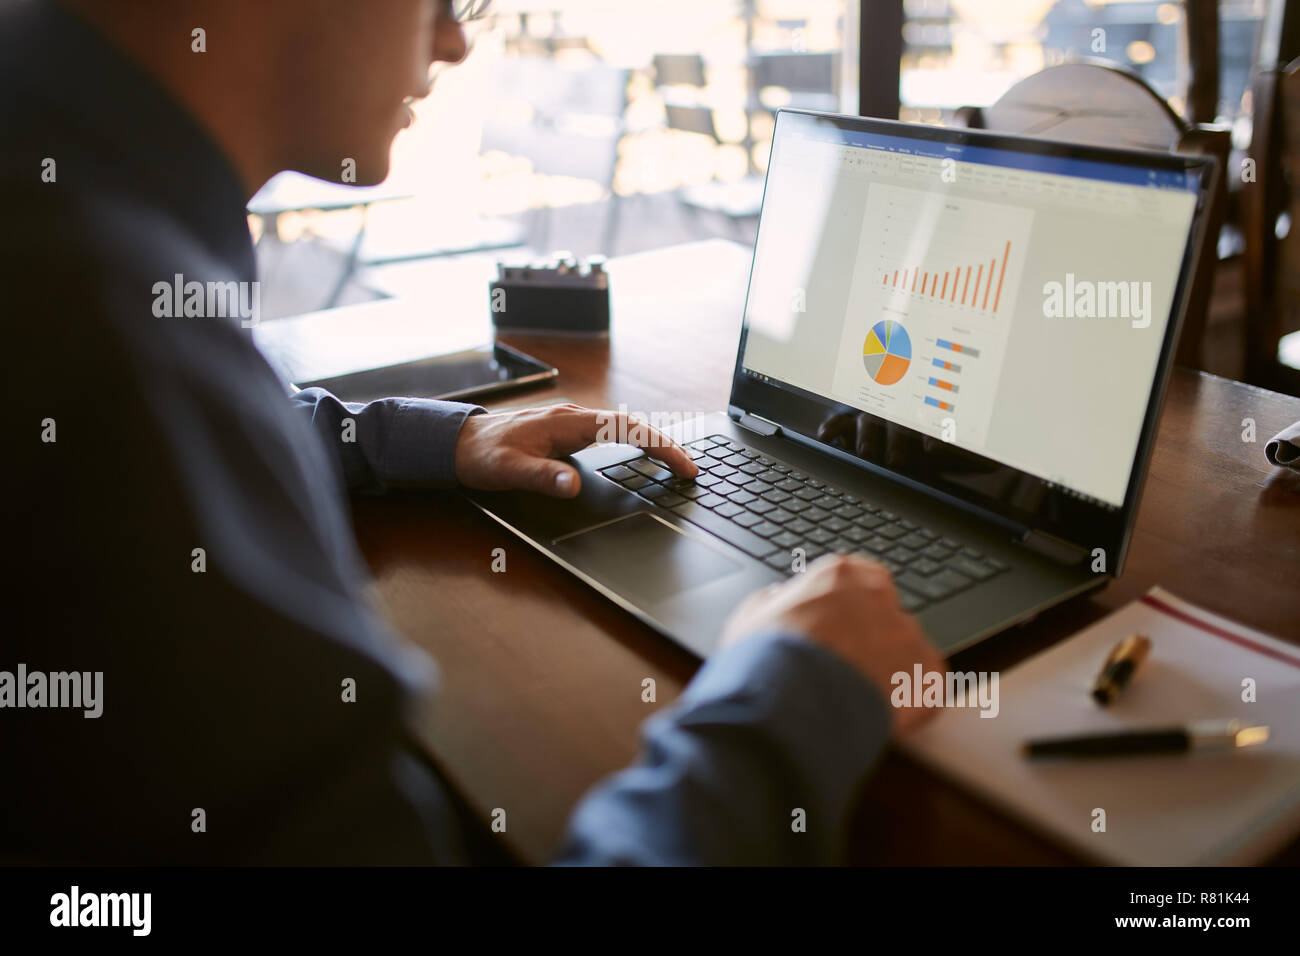 Close-up back view of caucasian businessman hands typing on laptop keyboard and using touchpad. Notebook and pen on foreground of workspace. Charts and diagrams on screen. Isolated no face view. Stock Photo